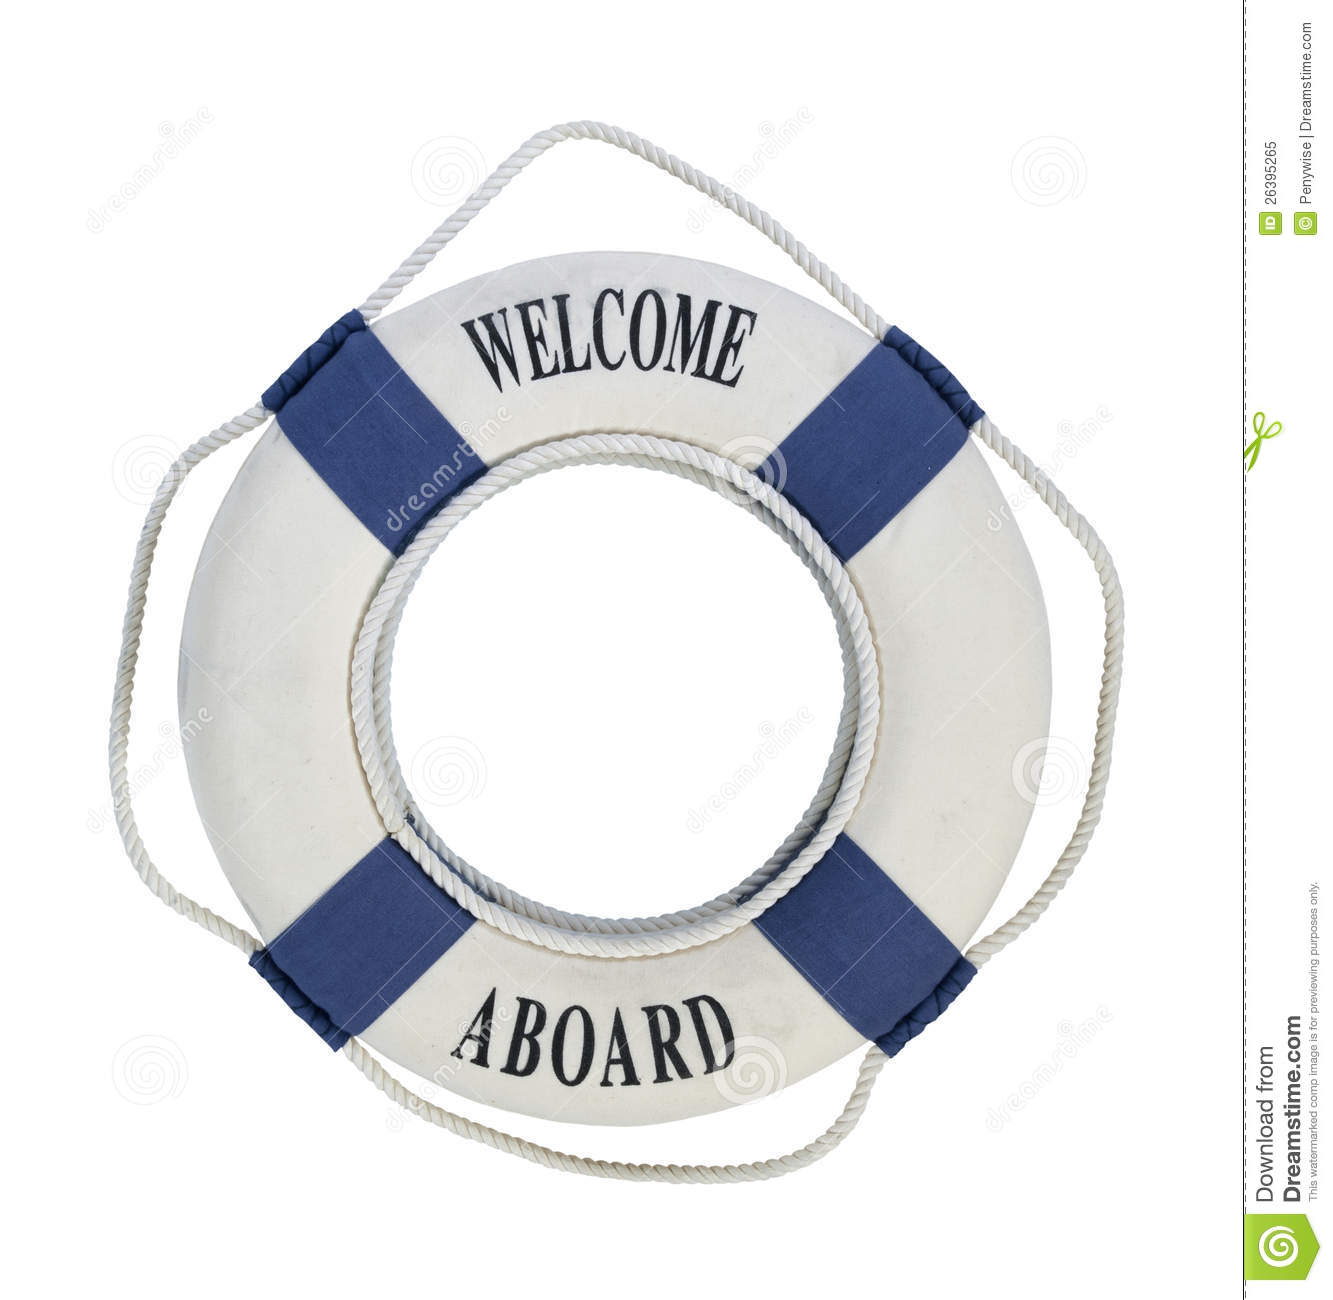 Welcome Aboard Round Floatation Life Preserver With Rope Handles For